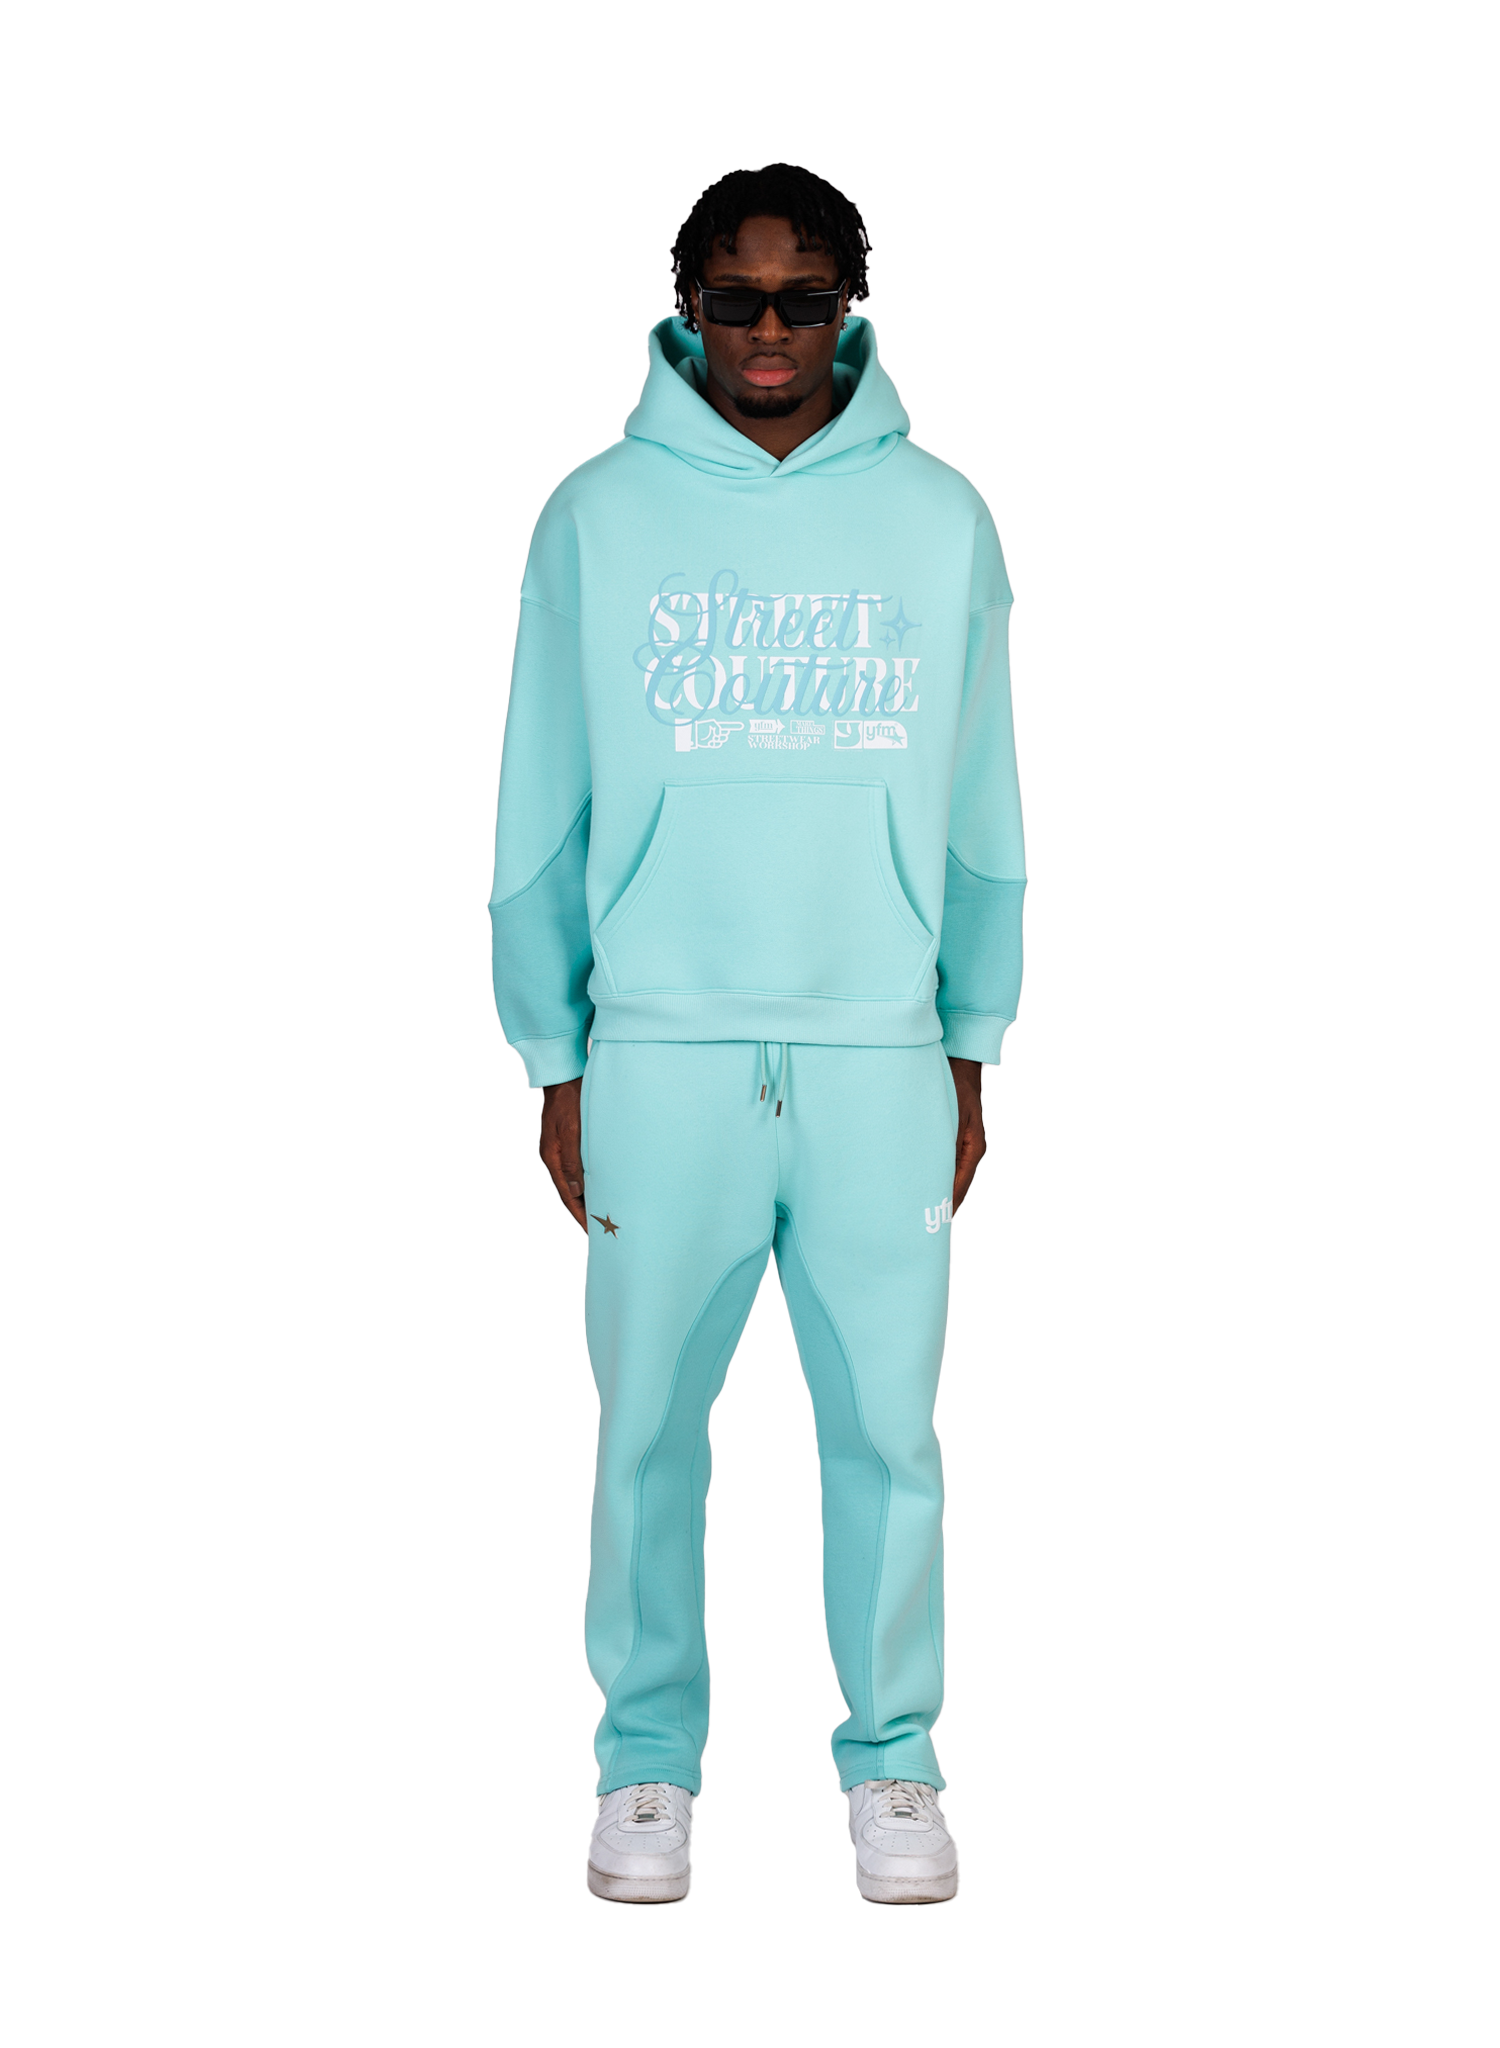 STREET COUTURE HOODIE